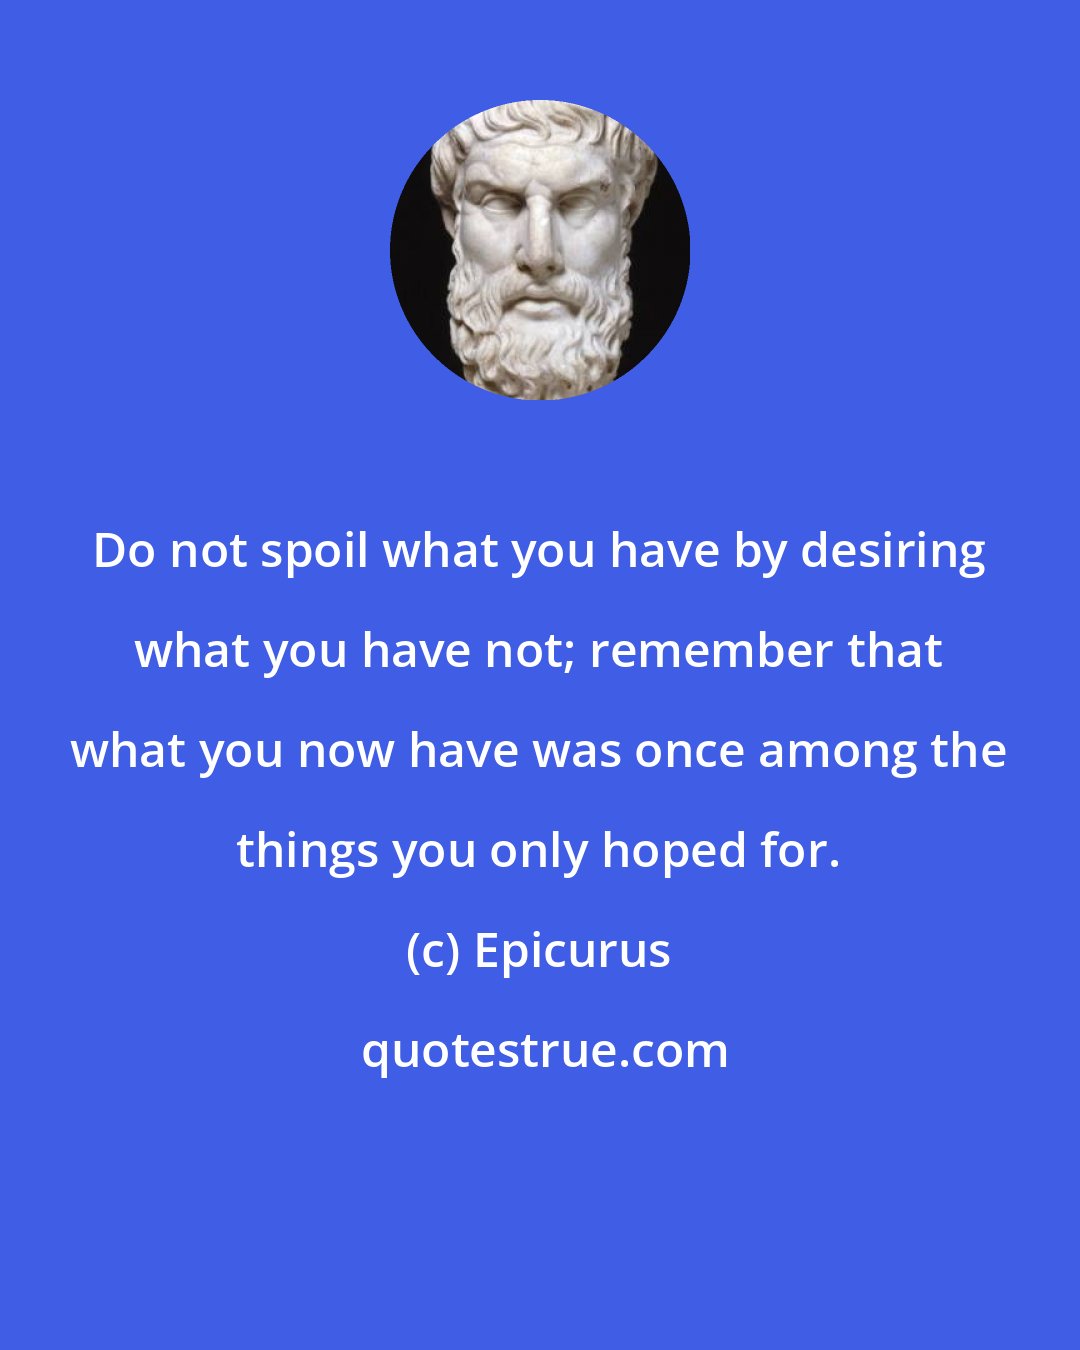 Epicurus: Do not spoil what you have by desiring what you have not; remember that what you now have was once among the things you only hoped for.